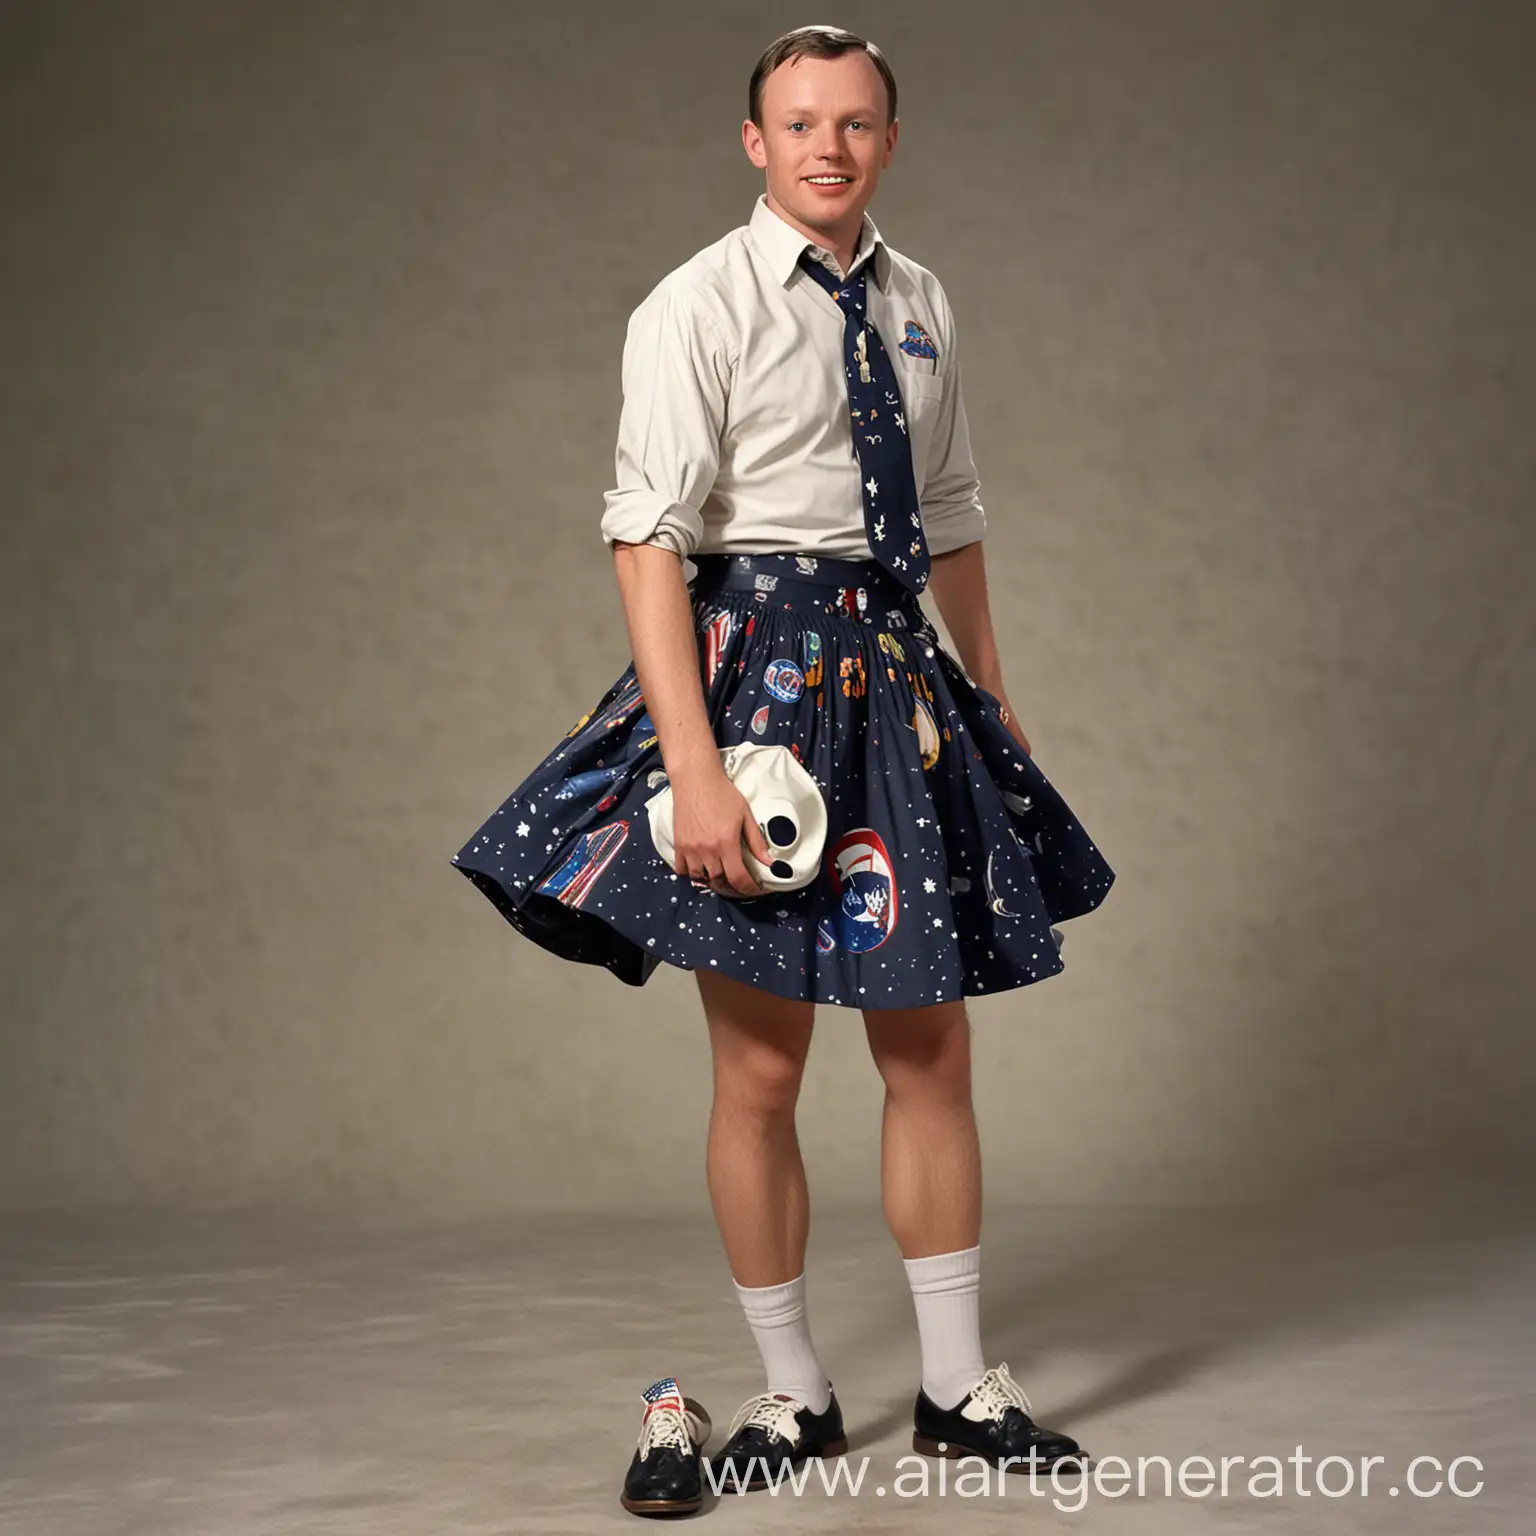 Neil-Armstrong-Wearing-a-Skirt-on-the-Moons-Surface